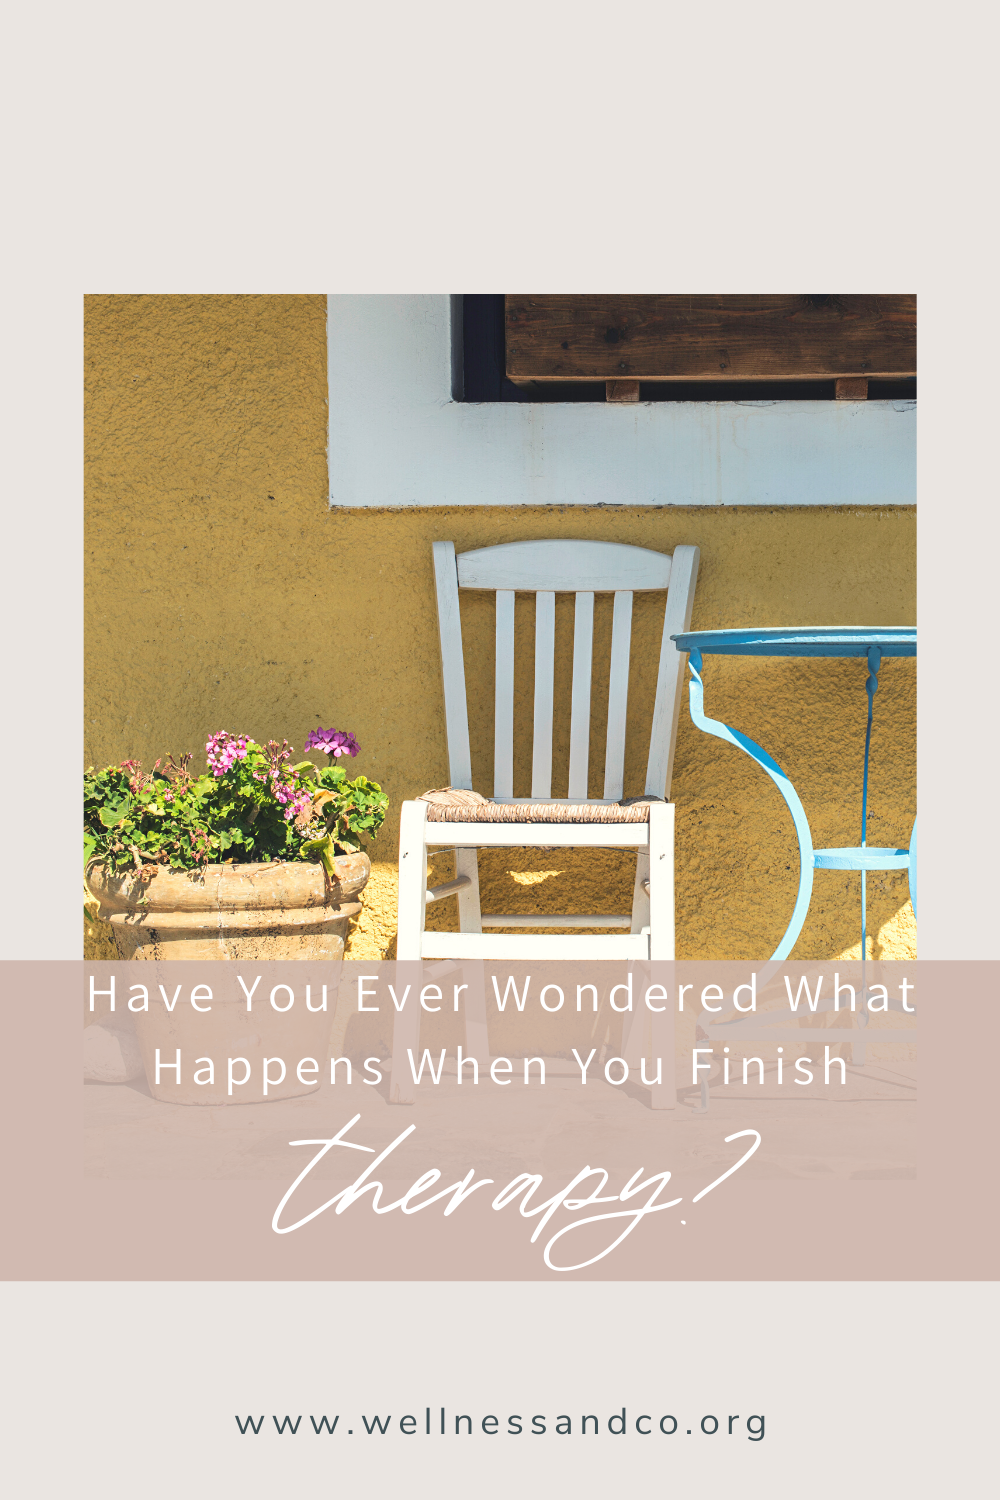 Have You Ever Wondered What Happens When You Finish Therapy? | This post considers, in poem form, what success looks like in the therapeutic process. It will show you how a motivated clients works through therapy and what happens when progress is complete. Cheers!